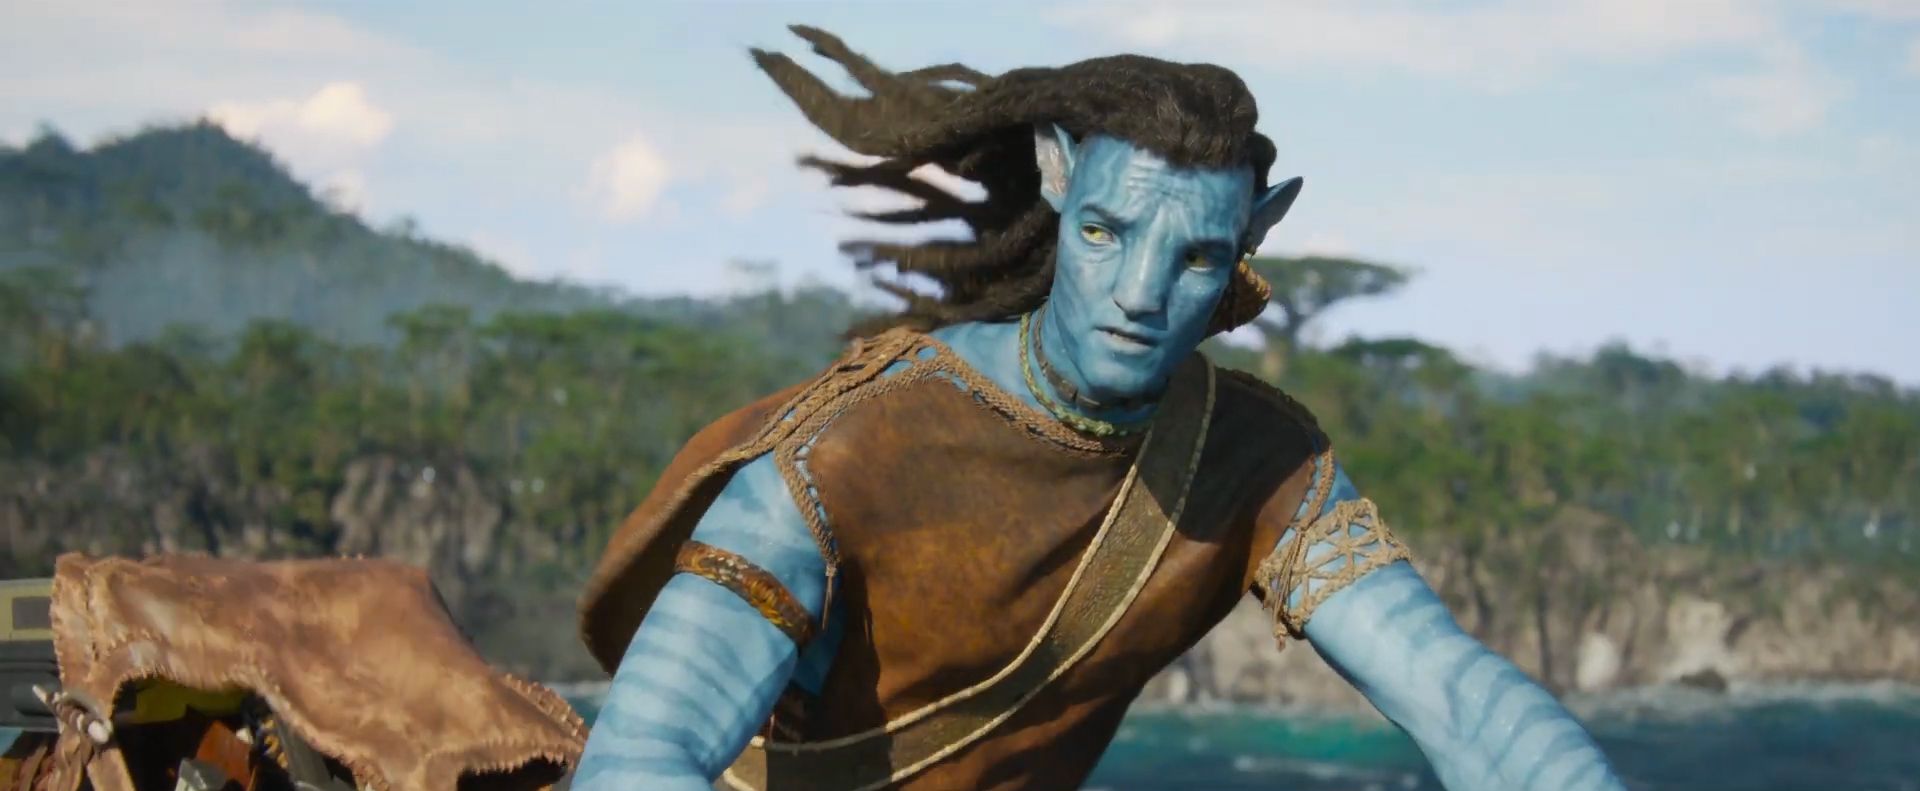 Box Office Breakdown Avatar The Way of Water Wins New Years Weekend  Becomes 2nd Biggest Movie of 2022 With 440 Million  Above the Line